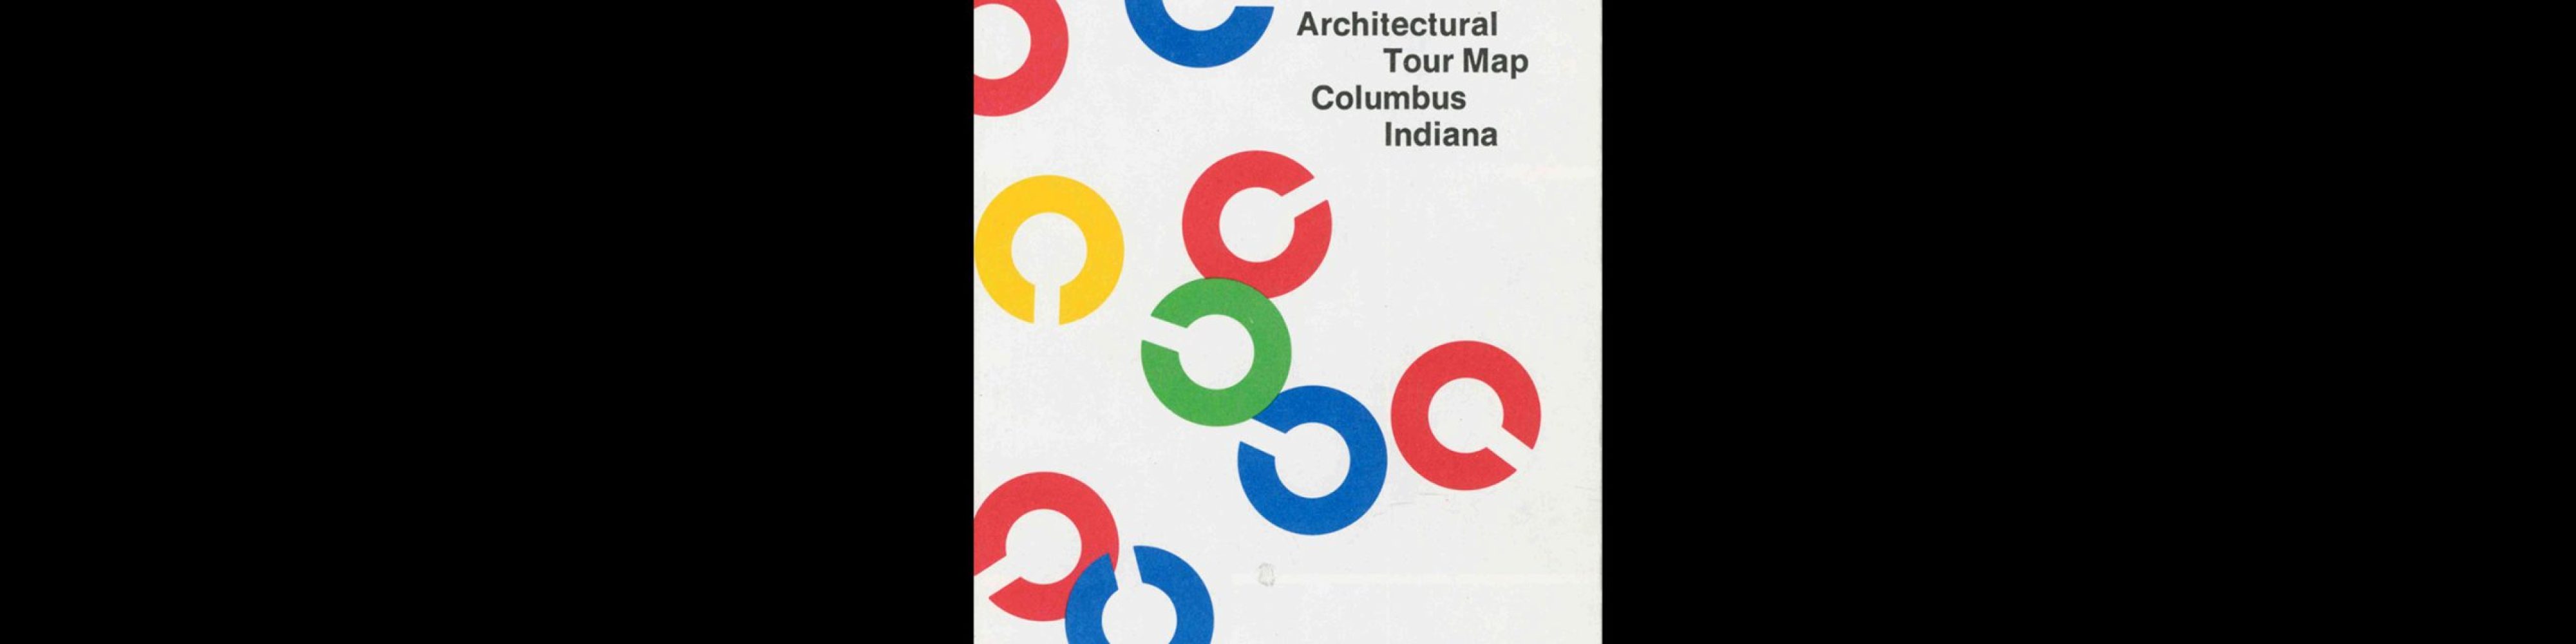 Architectural Tour Map, Columbus Indiana, 1991. Designed by Paul Rand